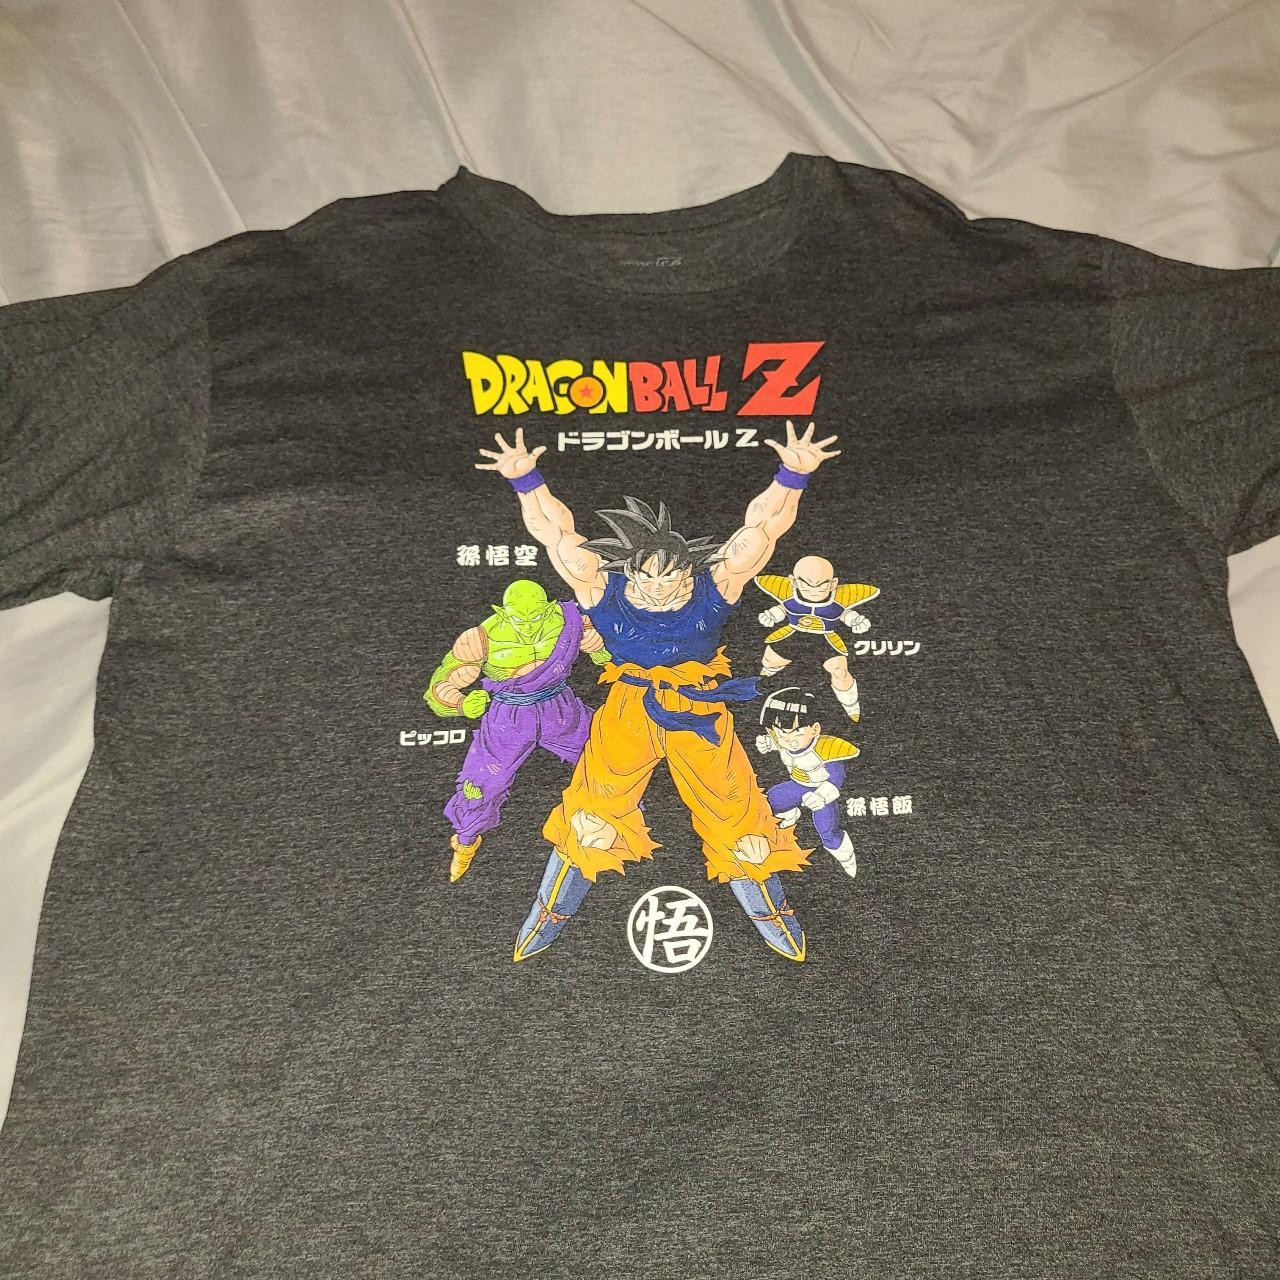 Dragon Ball Z Tee XL Might be a small hole... - Depop